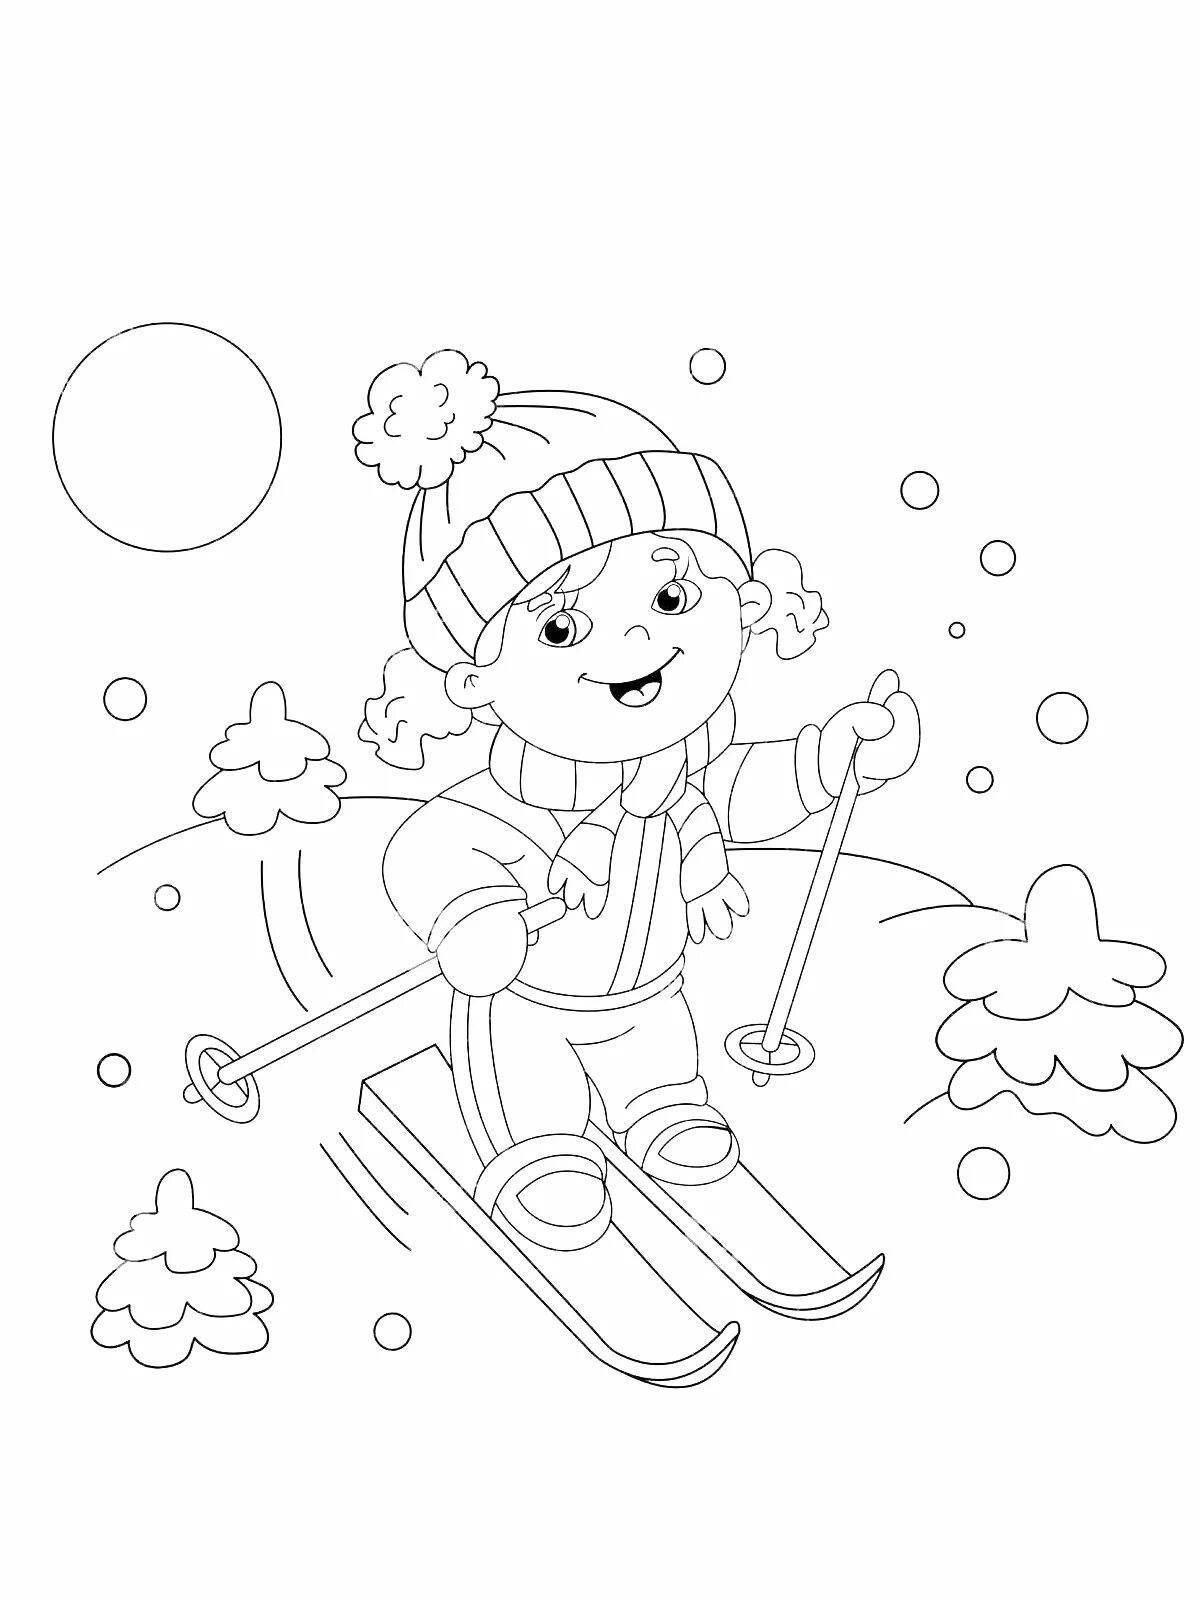 Coloring book funny skier for children 6-7 years old